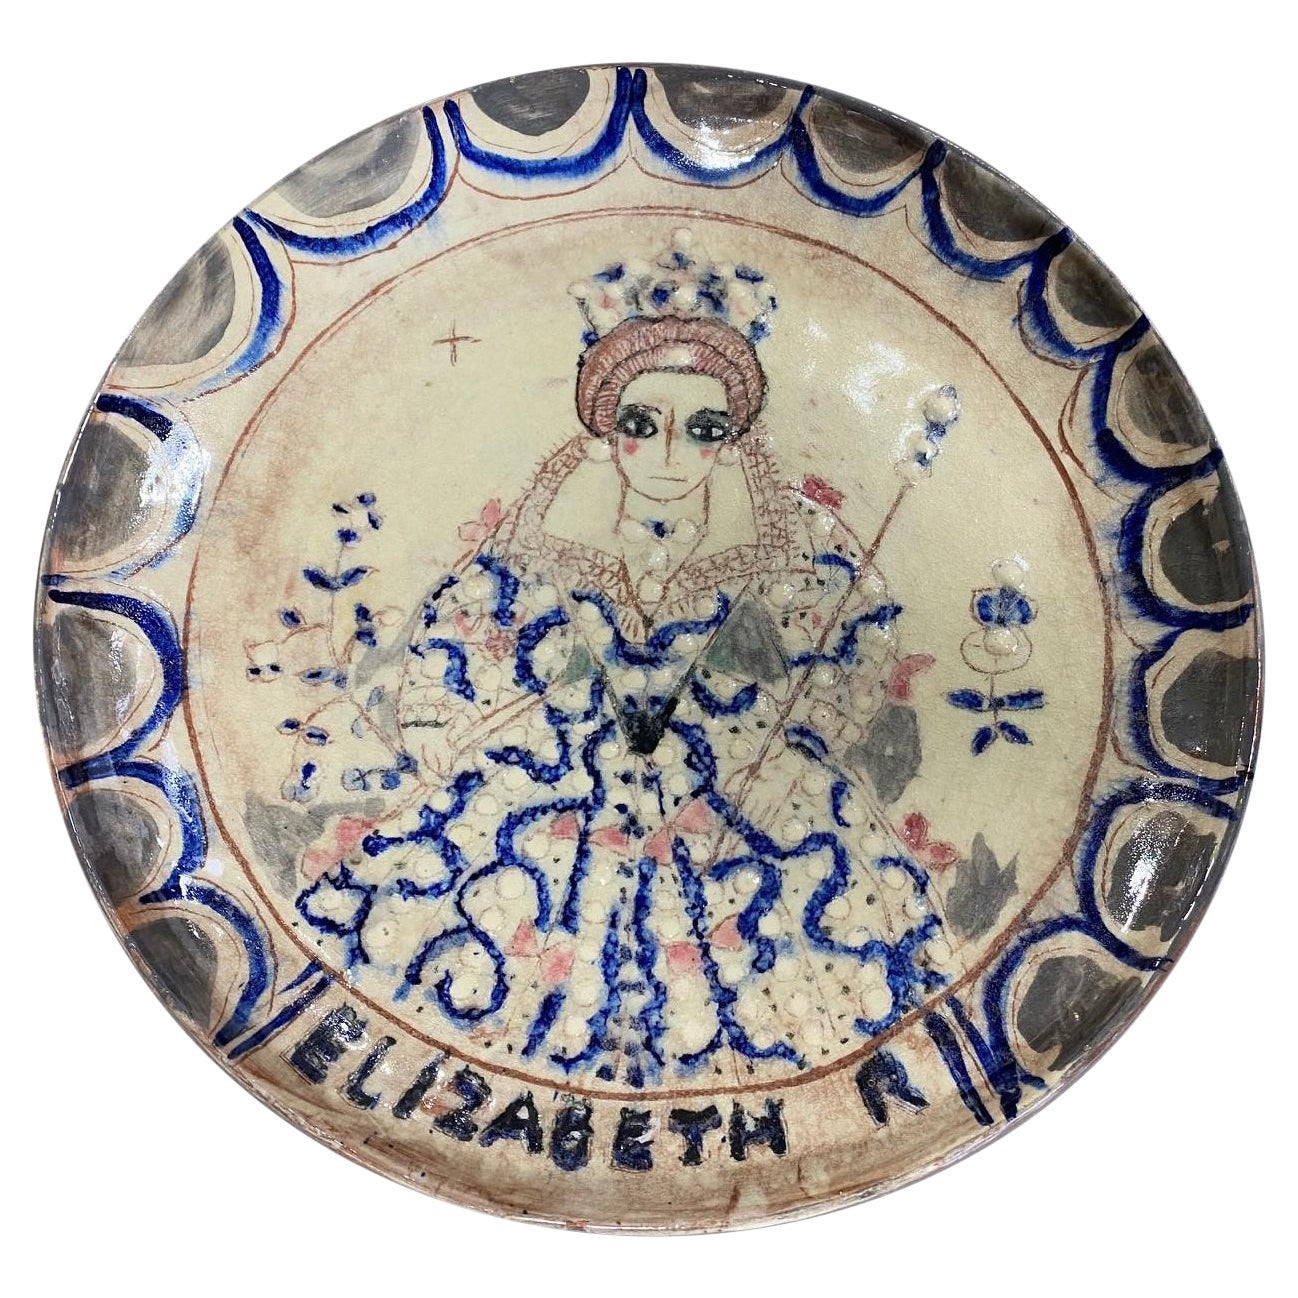 Beatrice Wood Signed Monumental Midcentury Queen Elizabeth Pottery Charger For Sale